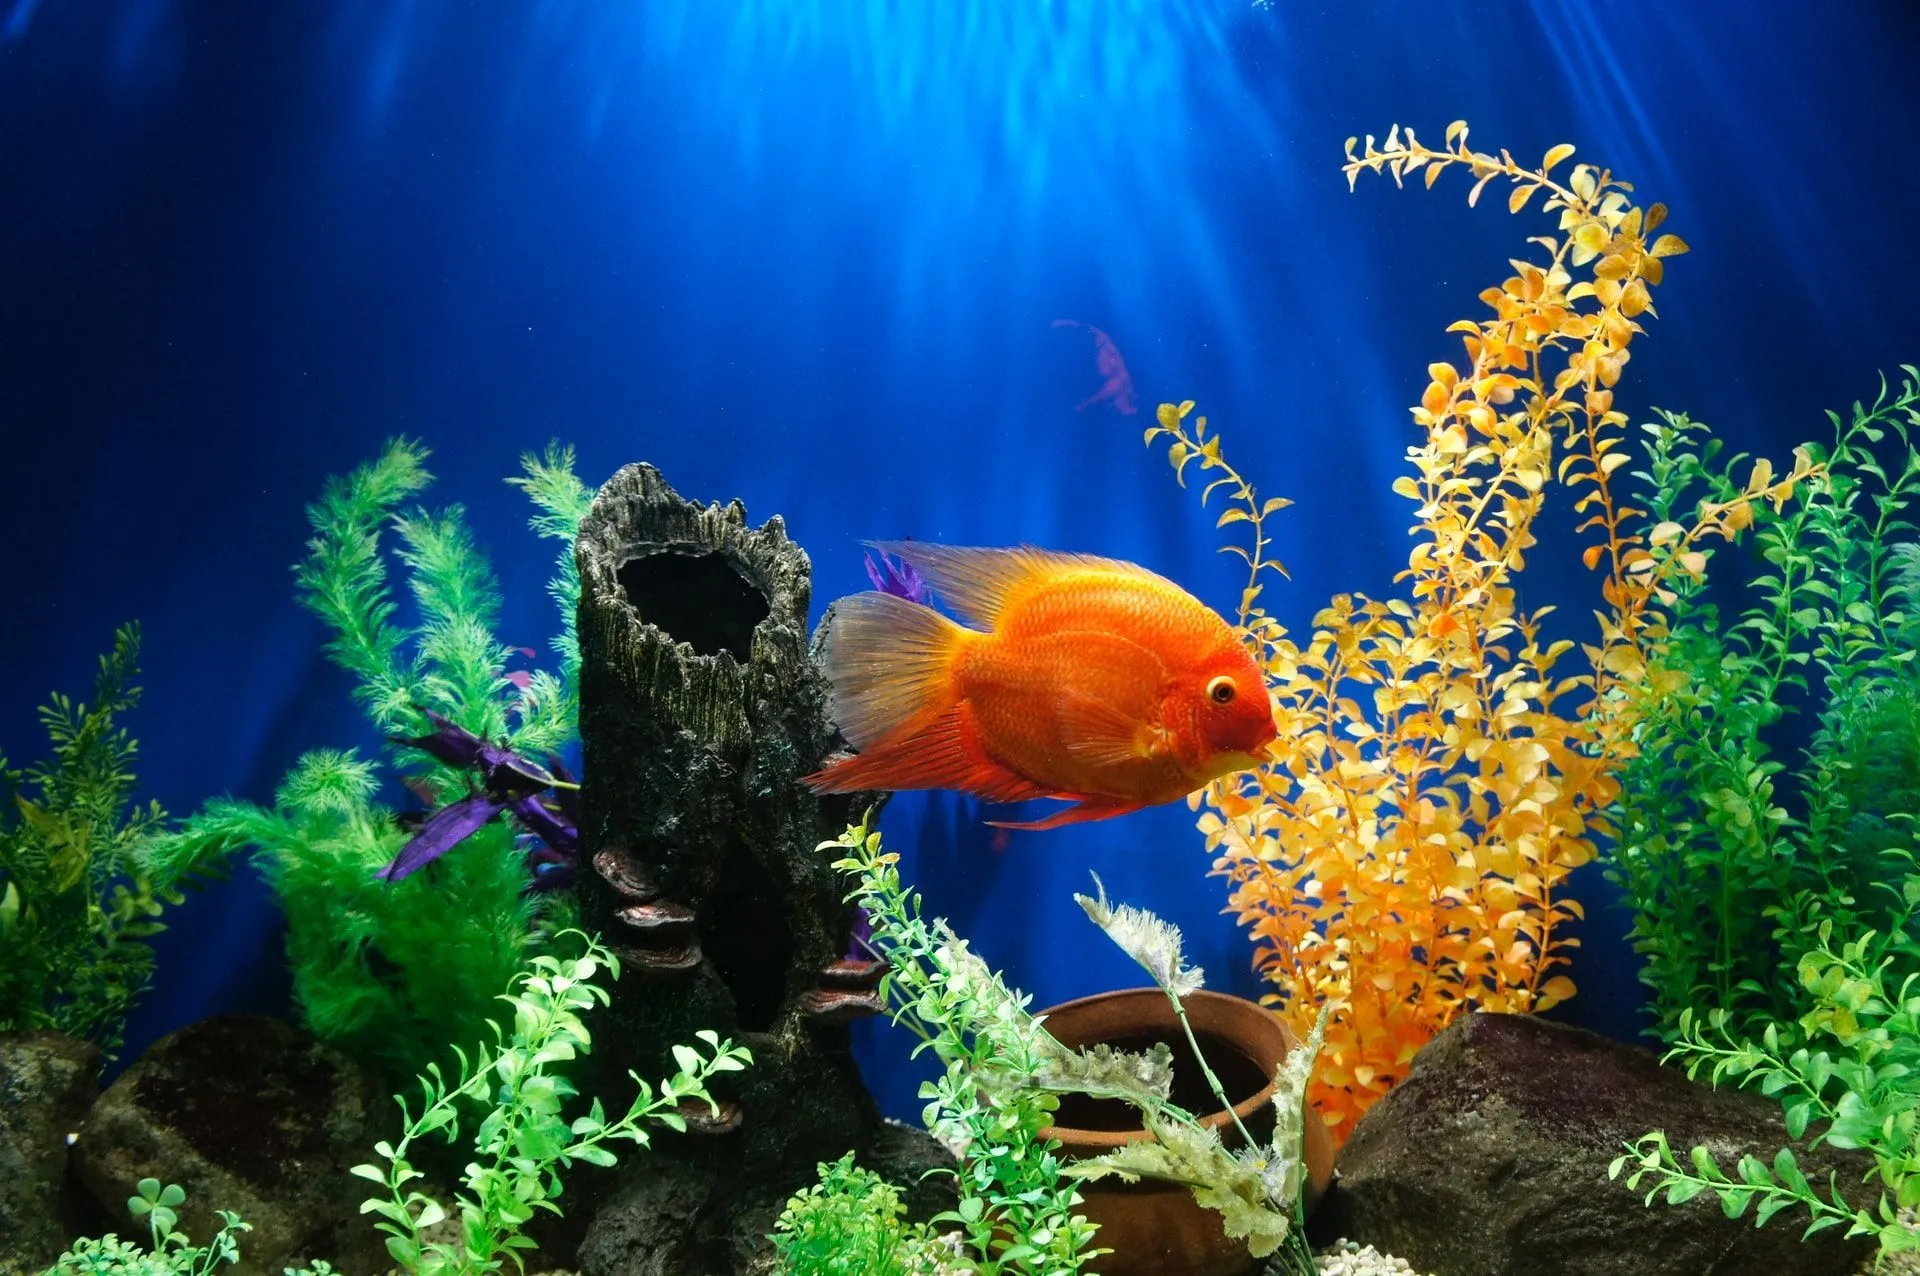 A fish tank filled with different aquatic plants and toys for your fish is important.